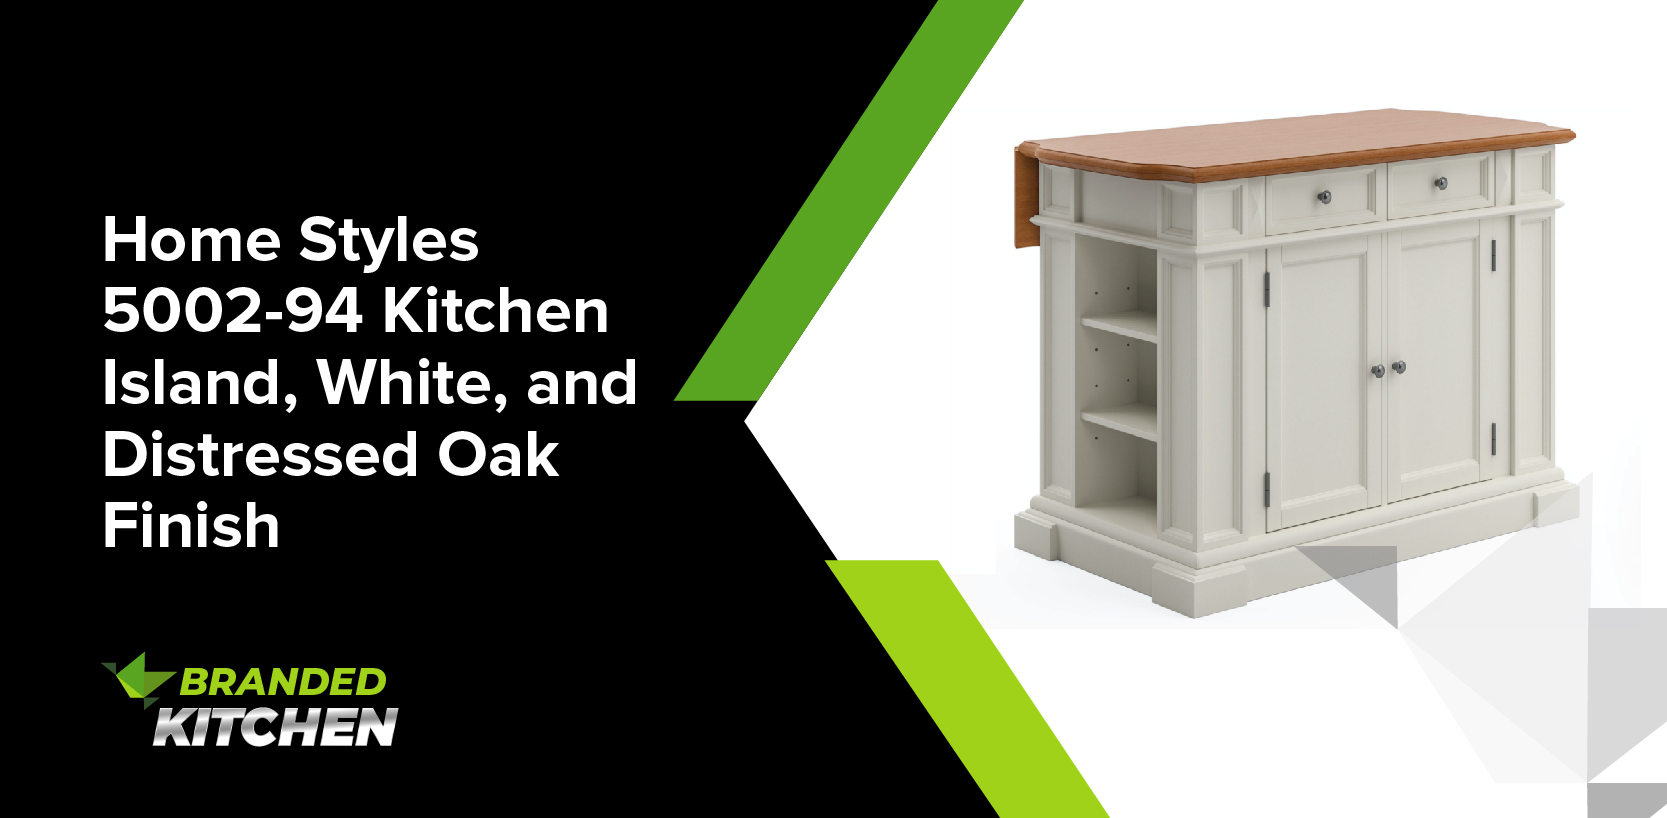 Home Styles 5002-94 Kitchen Island, White, and Distressed Oak Finish